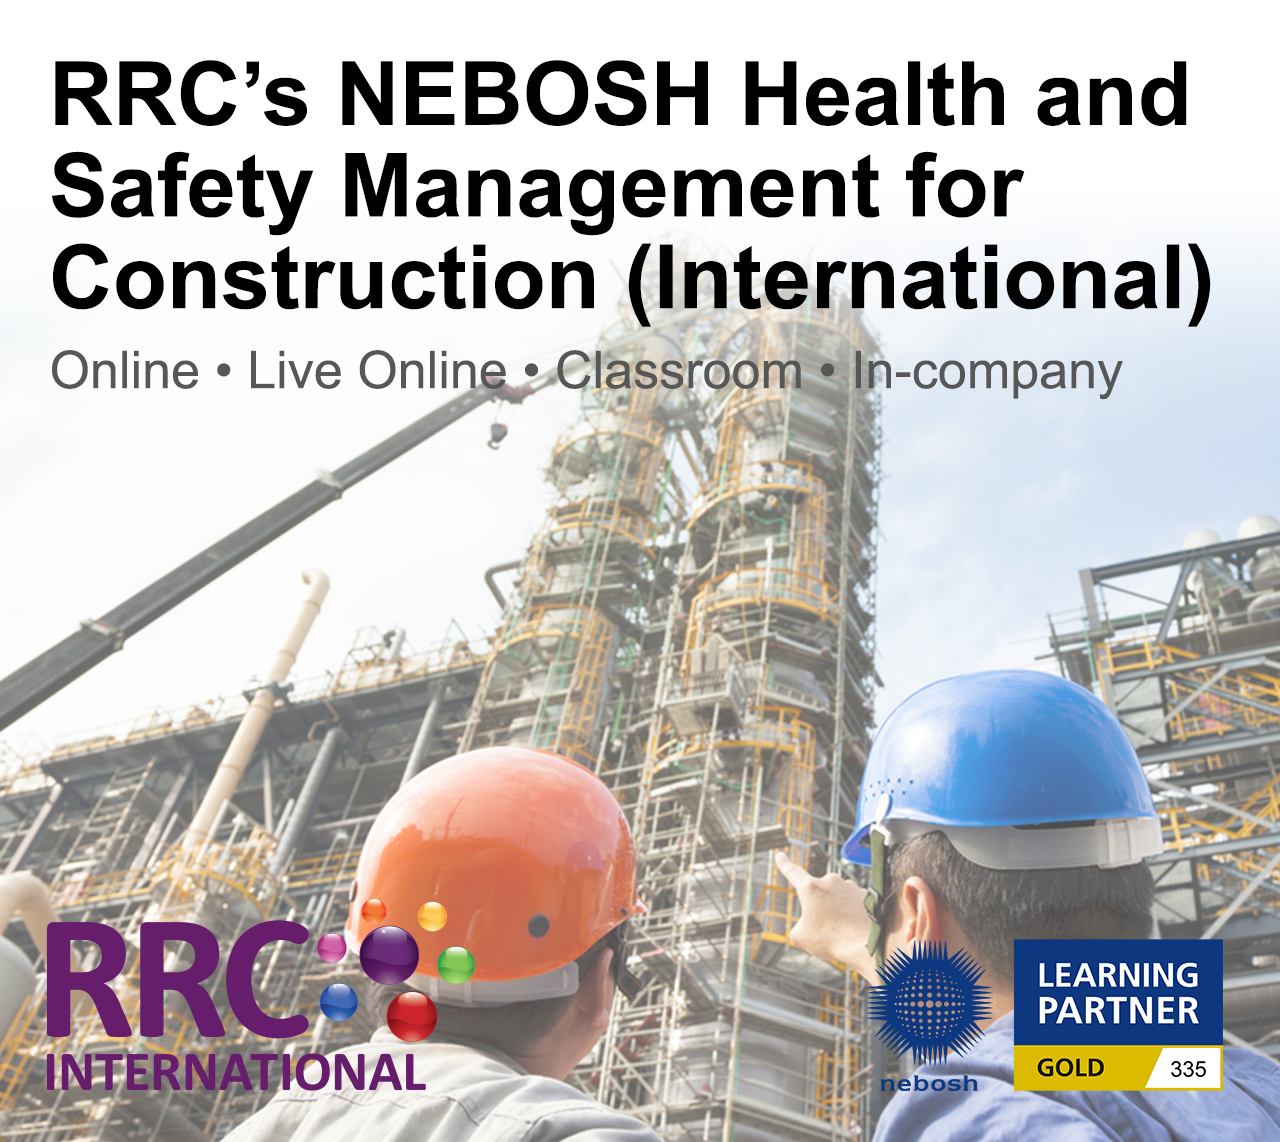 RRC's NEBOSH Health and Safety Management for Construction (International)